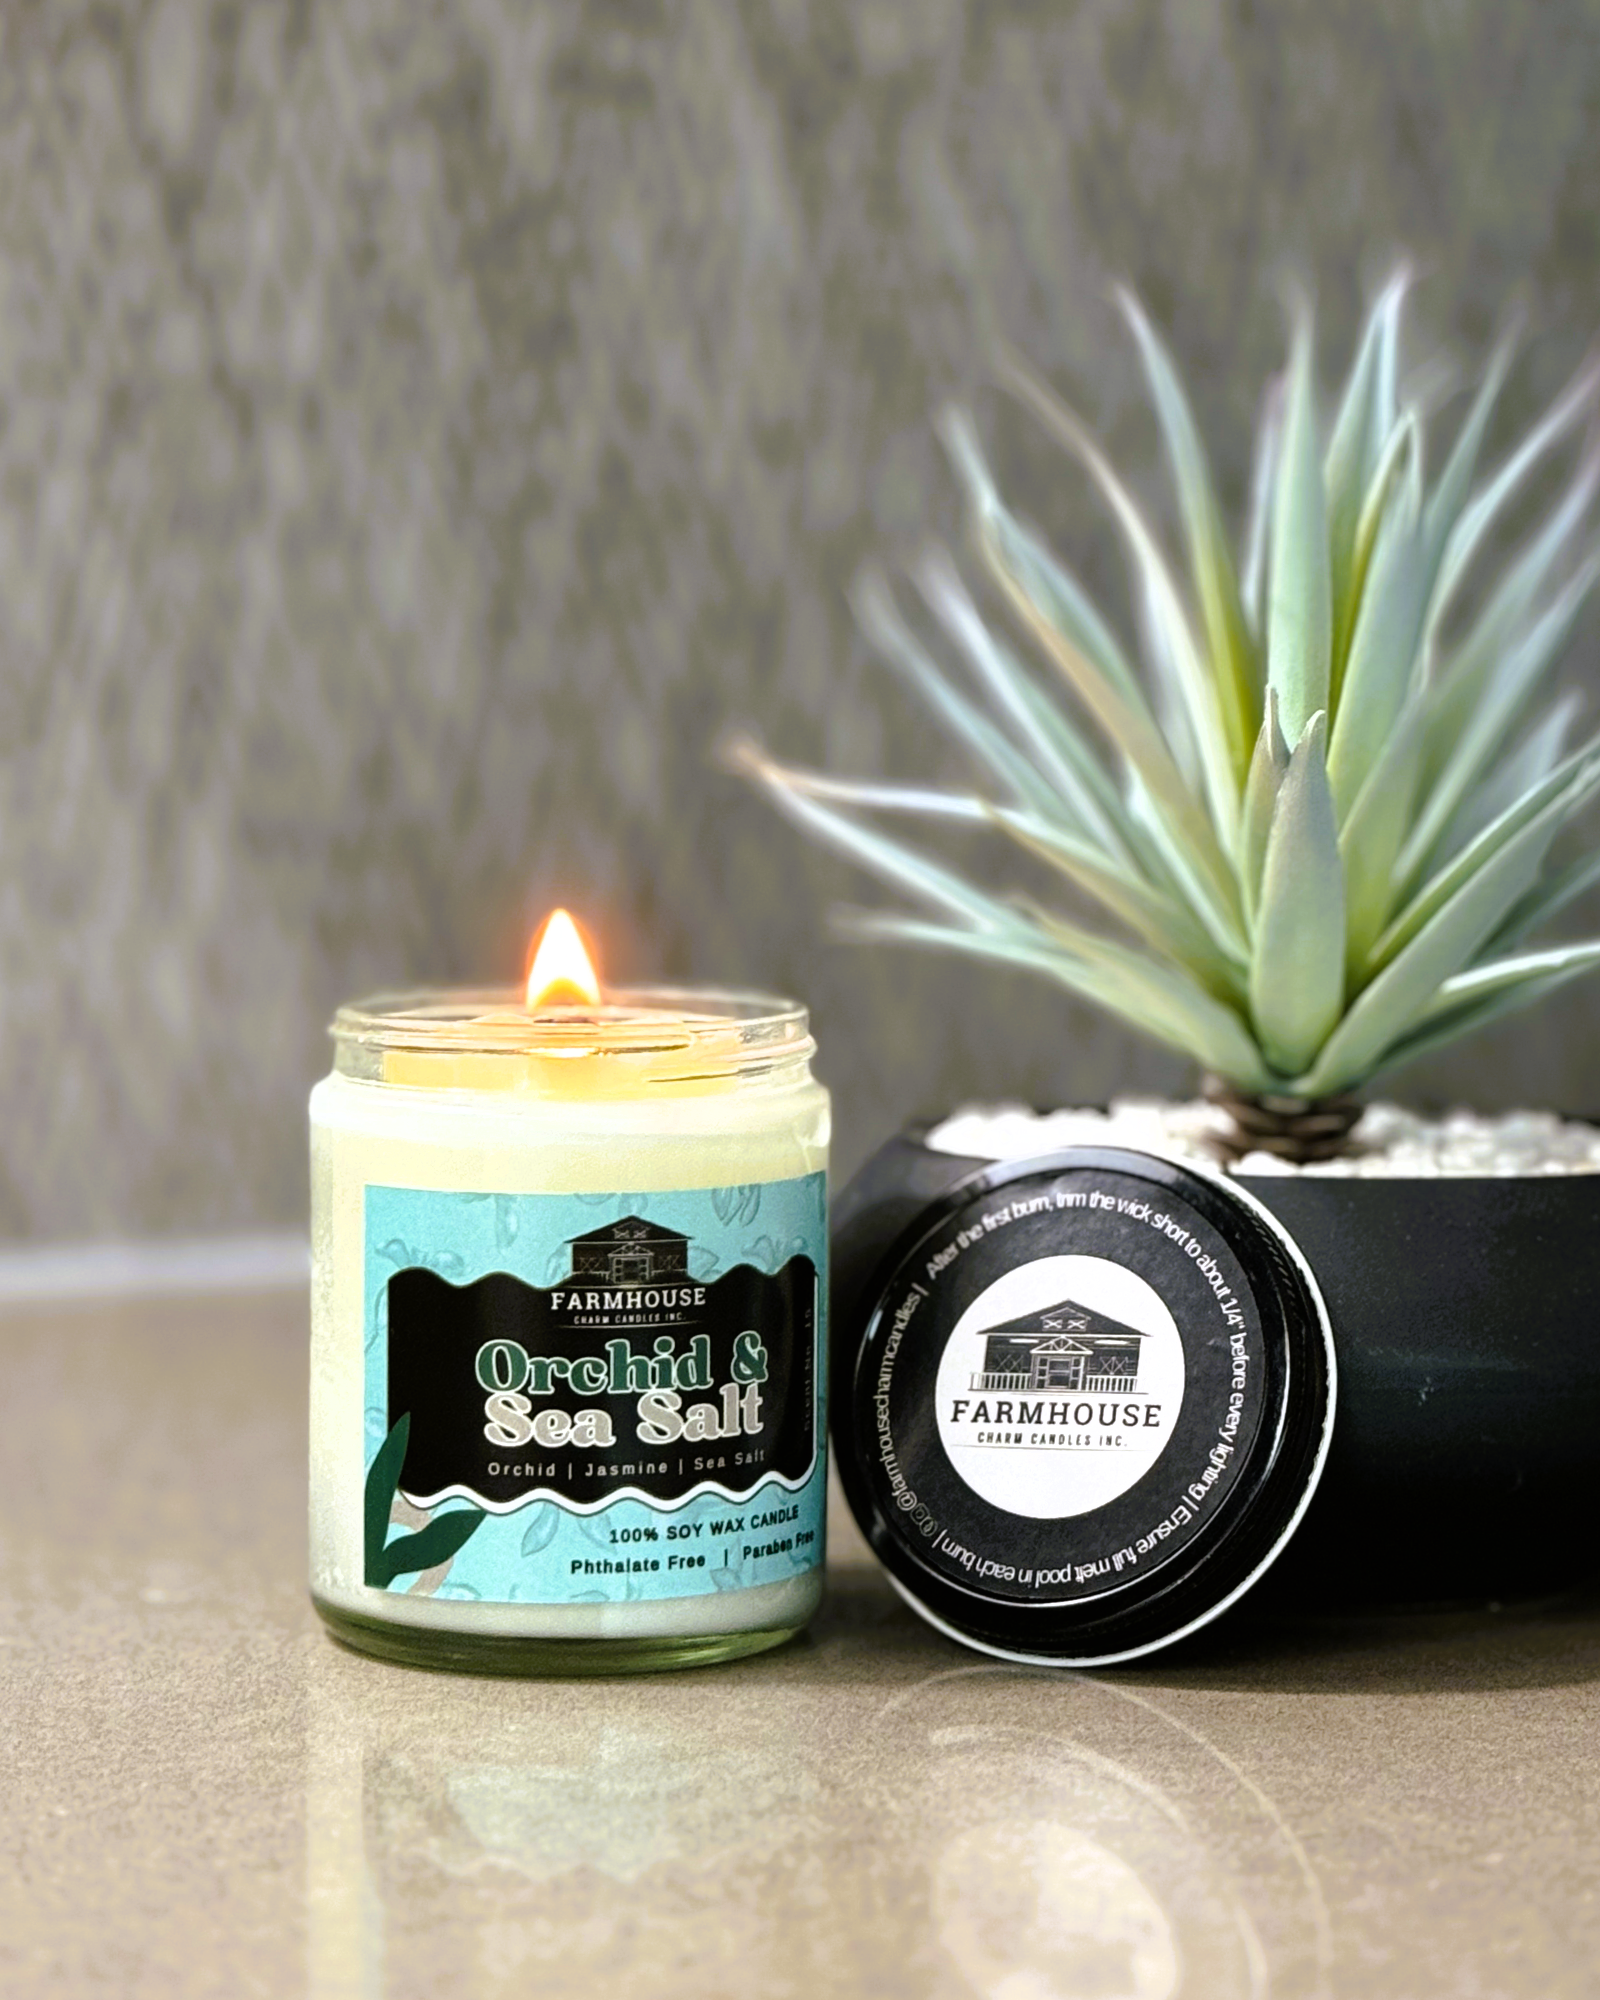 Step back into a world where every scent tells a story. Our Orchid & Sea Salt Soy Candle - Aroma Scent No. 15 will transport you to cherished moments by the sea, mingled with the sweet memories of blooming gardens. Imagine the soft floral notes of orchid, jasmine, and lily filling your home, combined with the crisp and refreshing sea salt mist. It's an elegant yet invigorating fragrance that brings the best of nature into your living space. www.farmhousecharmcandles.com